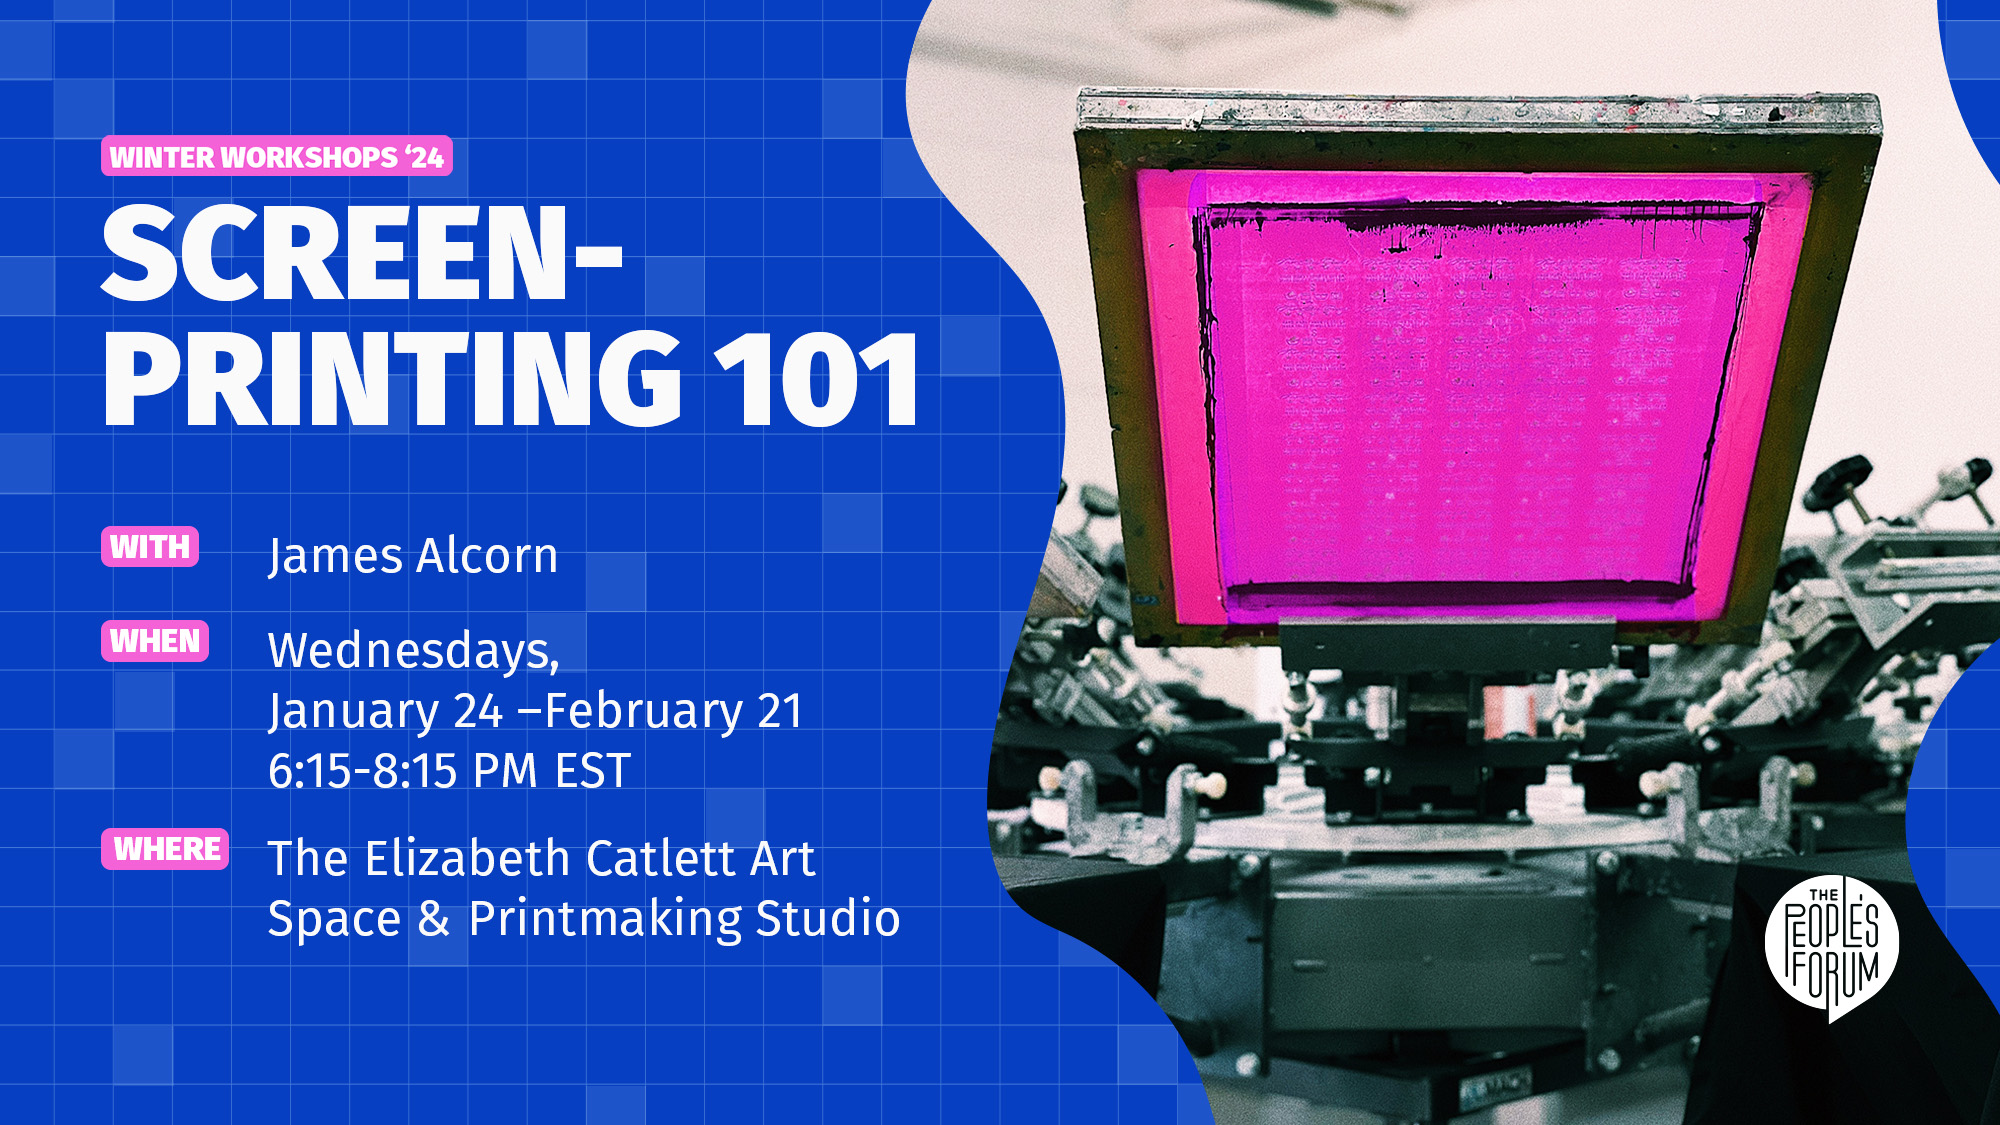 A blue-background banner with a screen-printing machine to the right. The text reads: Winter Workshops '24, Screen-Printing 101 with James Alcorn, Wednesdays, January 24